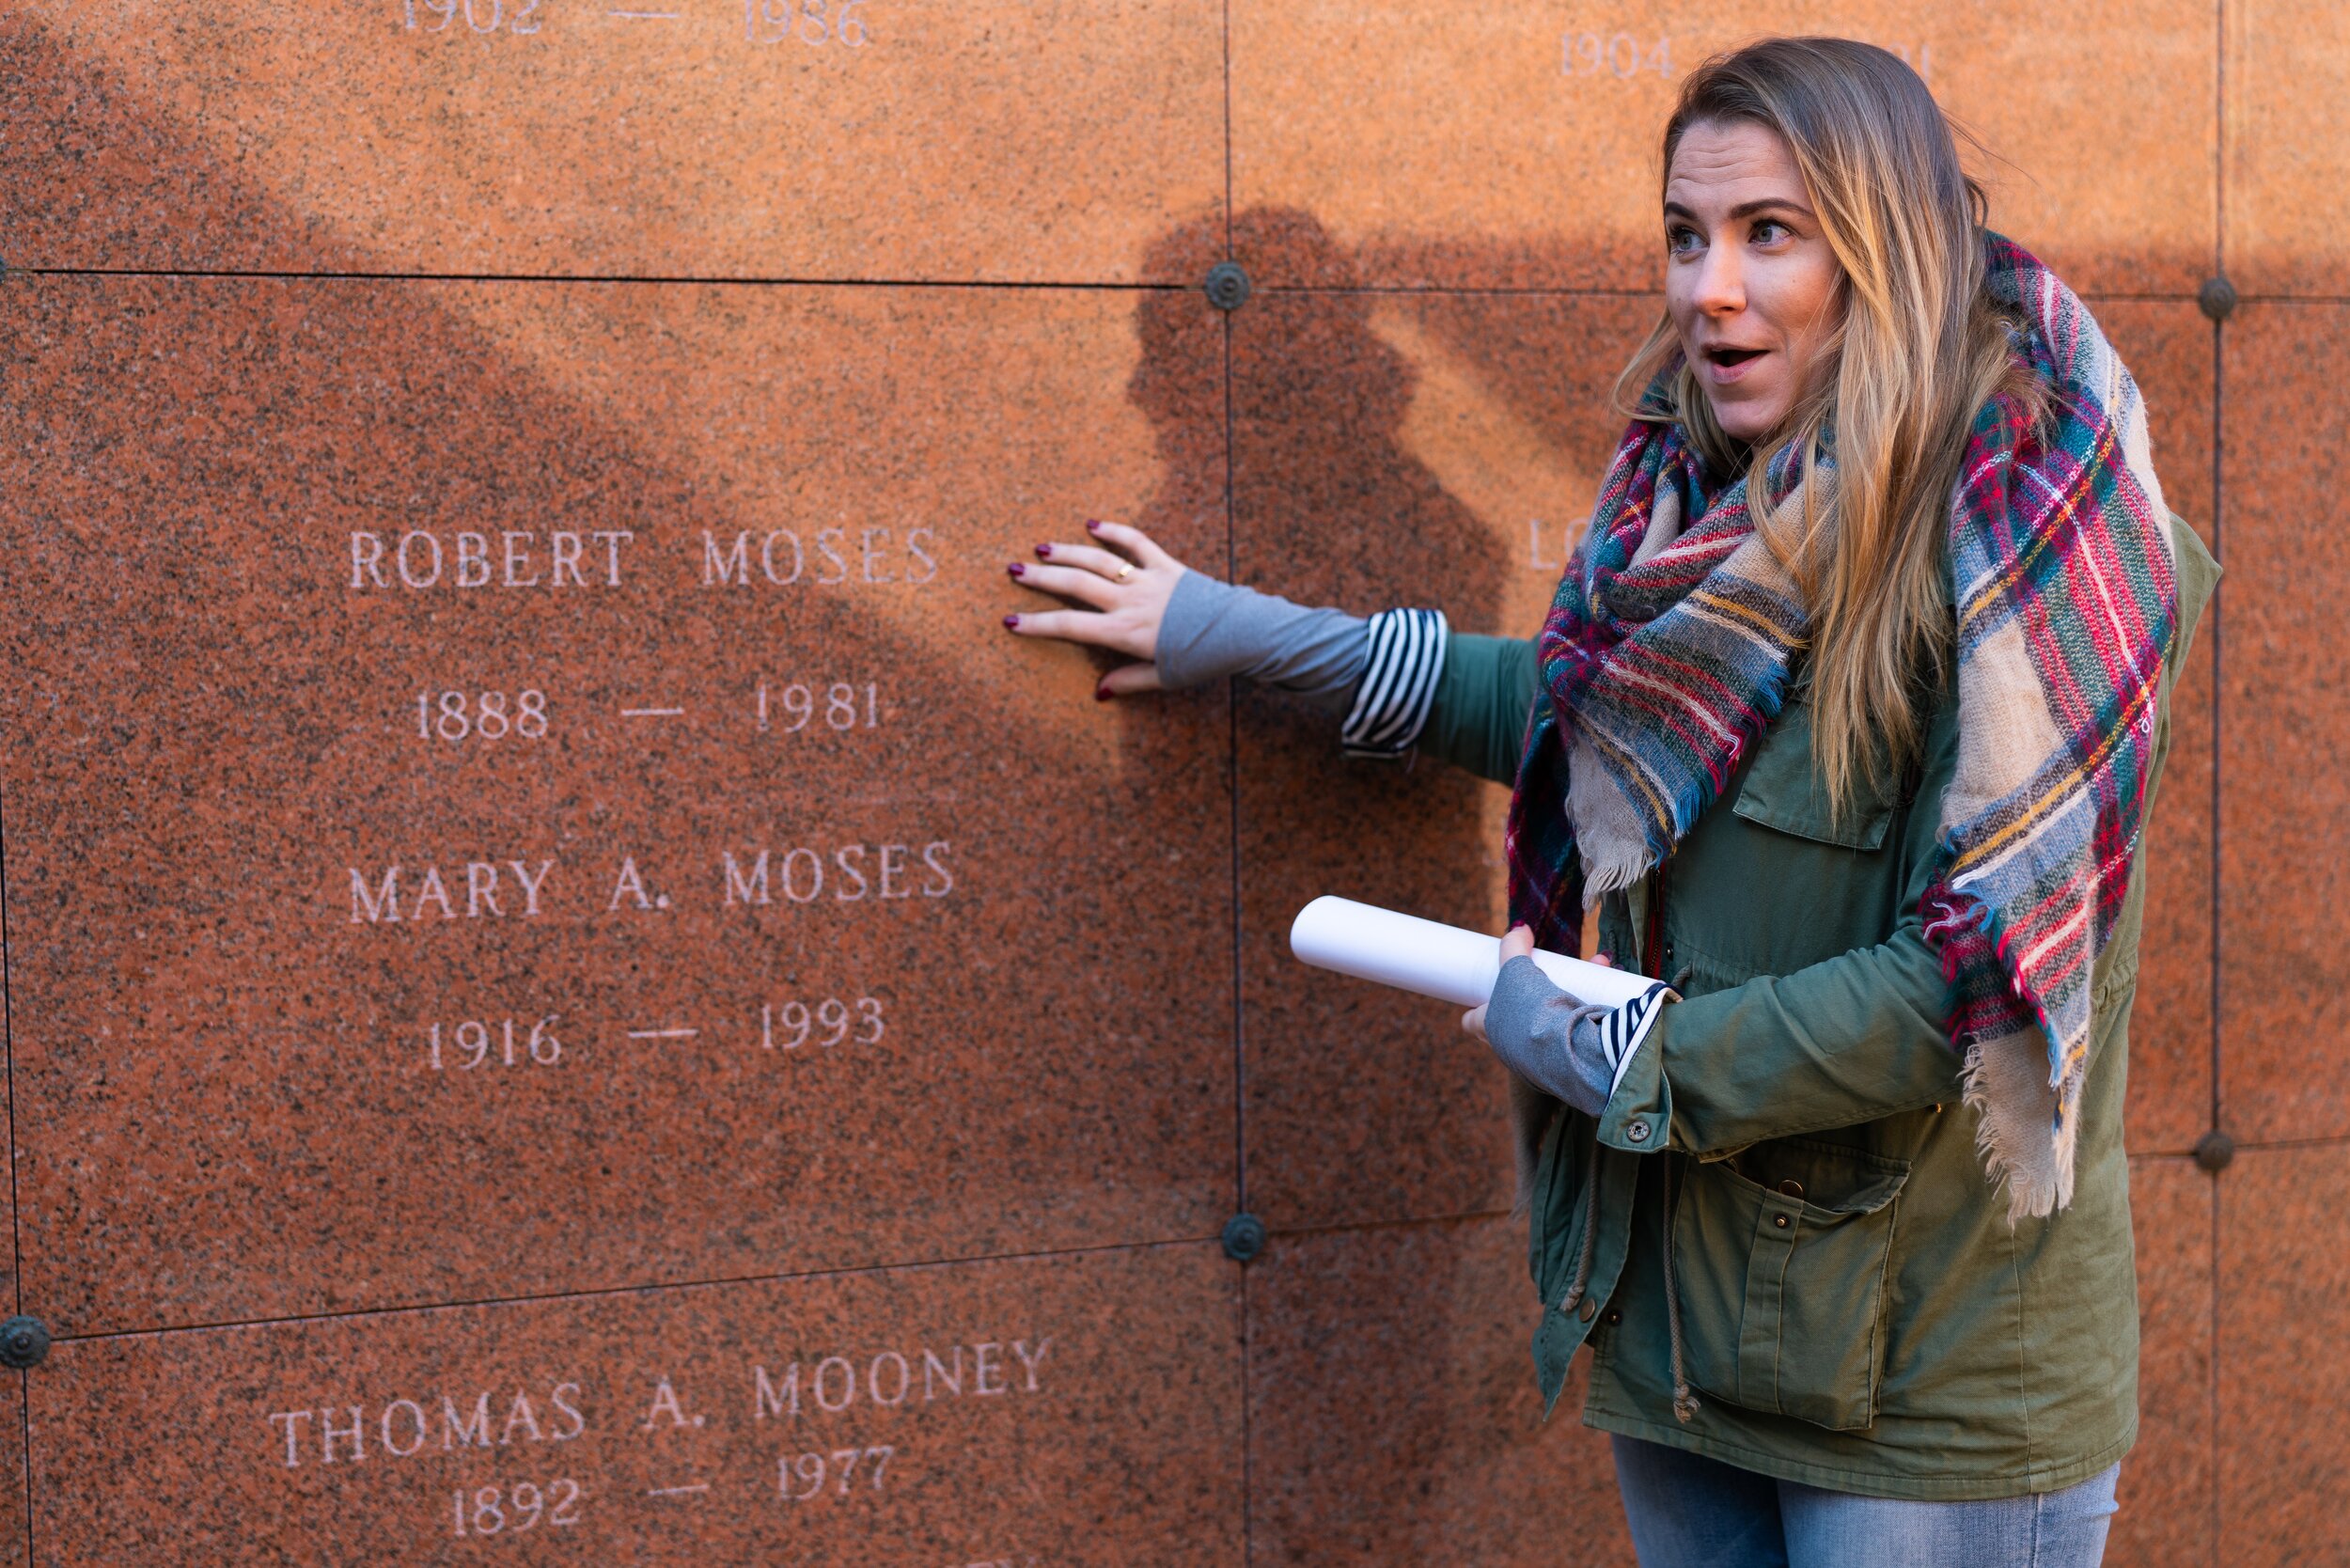   Elizabeth Cooney, Woodlawn's Coordinator of Educational Programming, stars the tour at the grave of Robert Moses.  